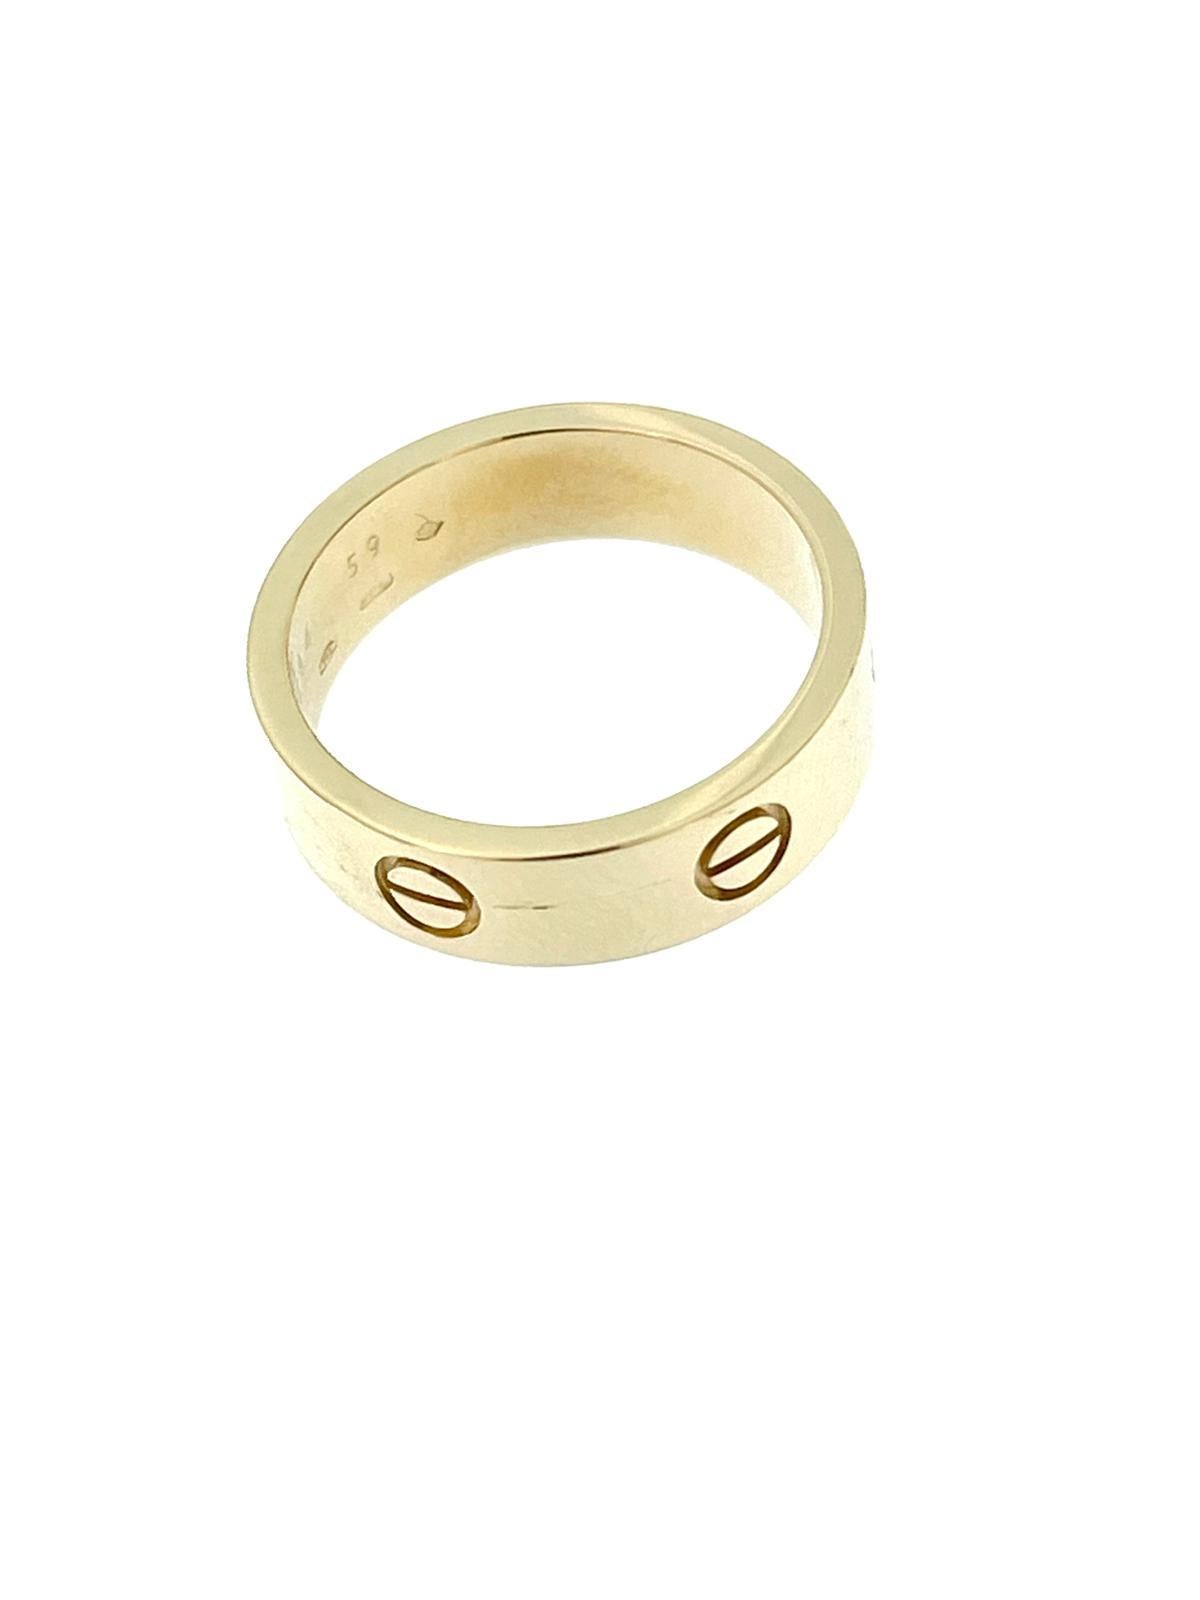 The Cartier Love Ring in Yellow Gold is a luxurious and iconic piece of jewelry created by the renowned French jewelry and watchmaker, Cartier. 

The ring is crafted from 18-karat yellow gold, which is known for its rich and warm color, as well as